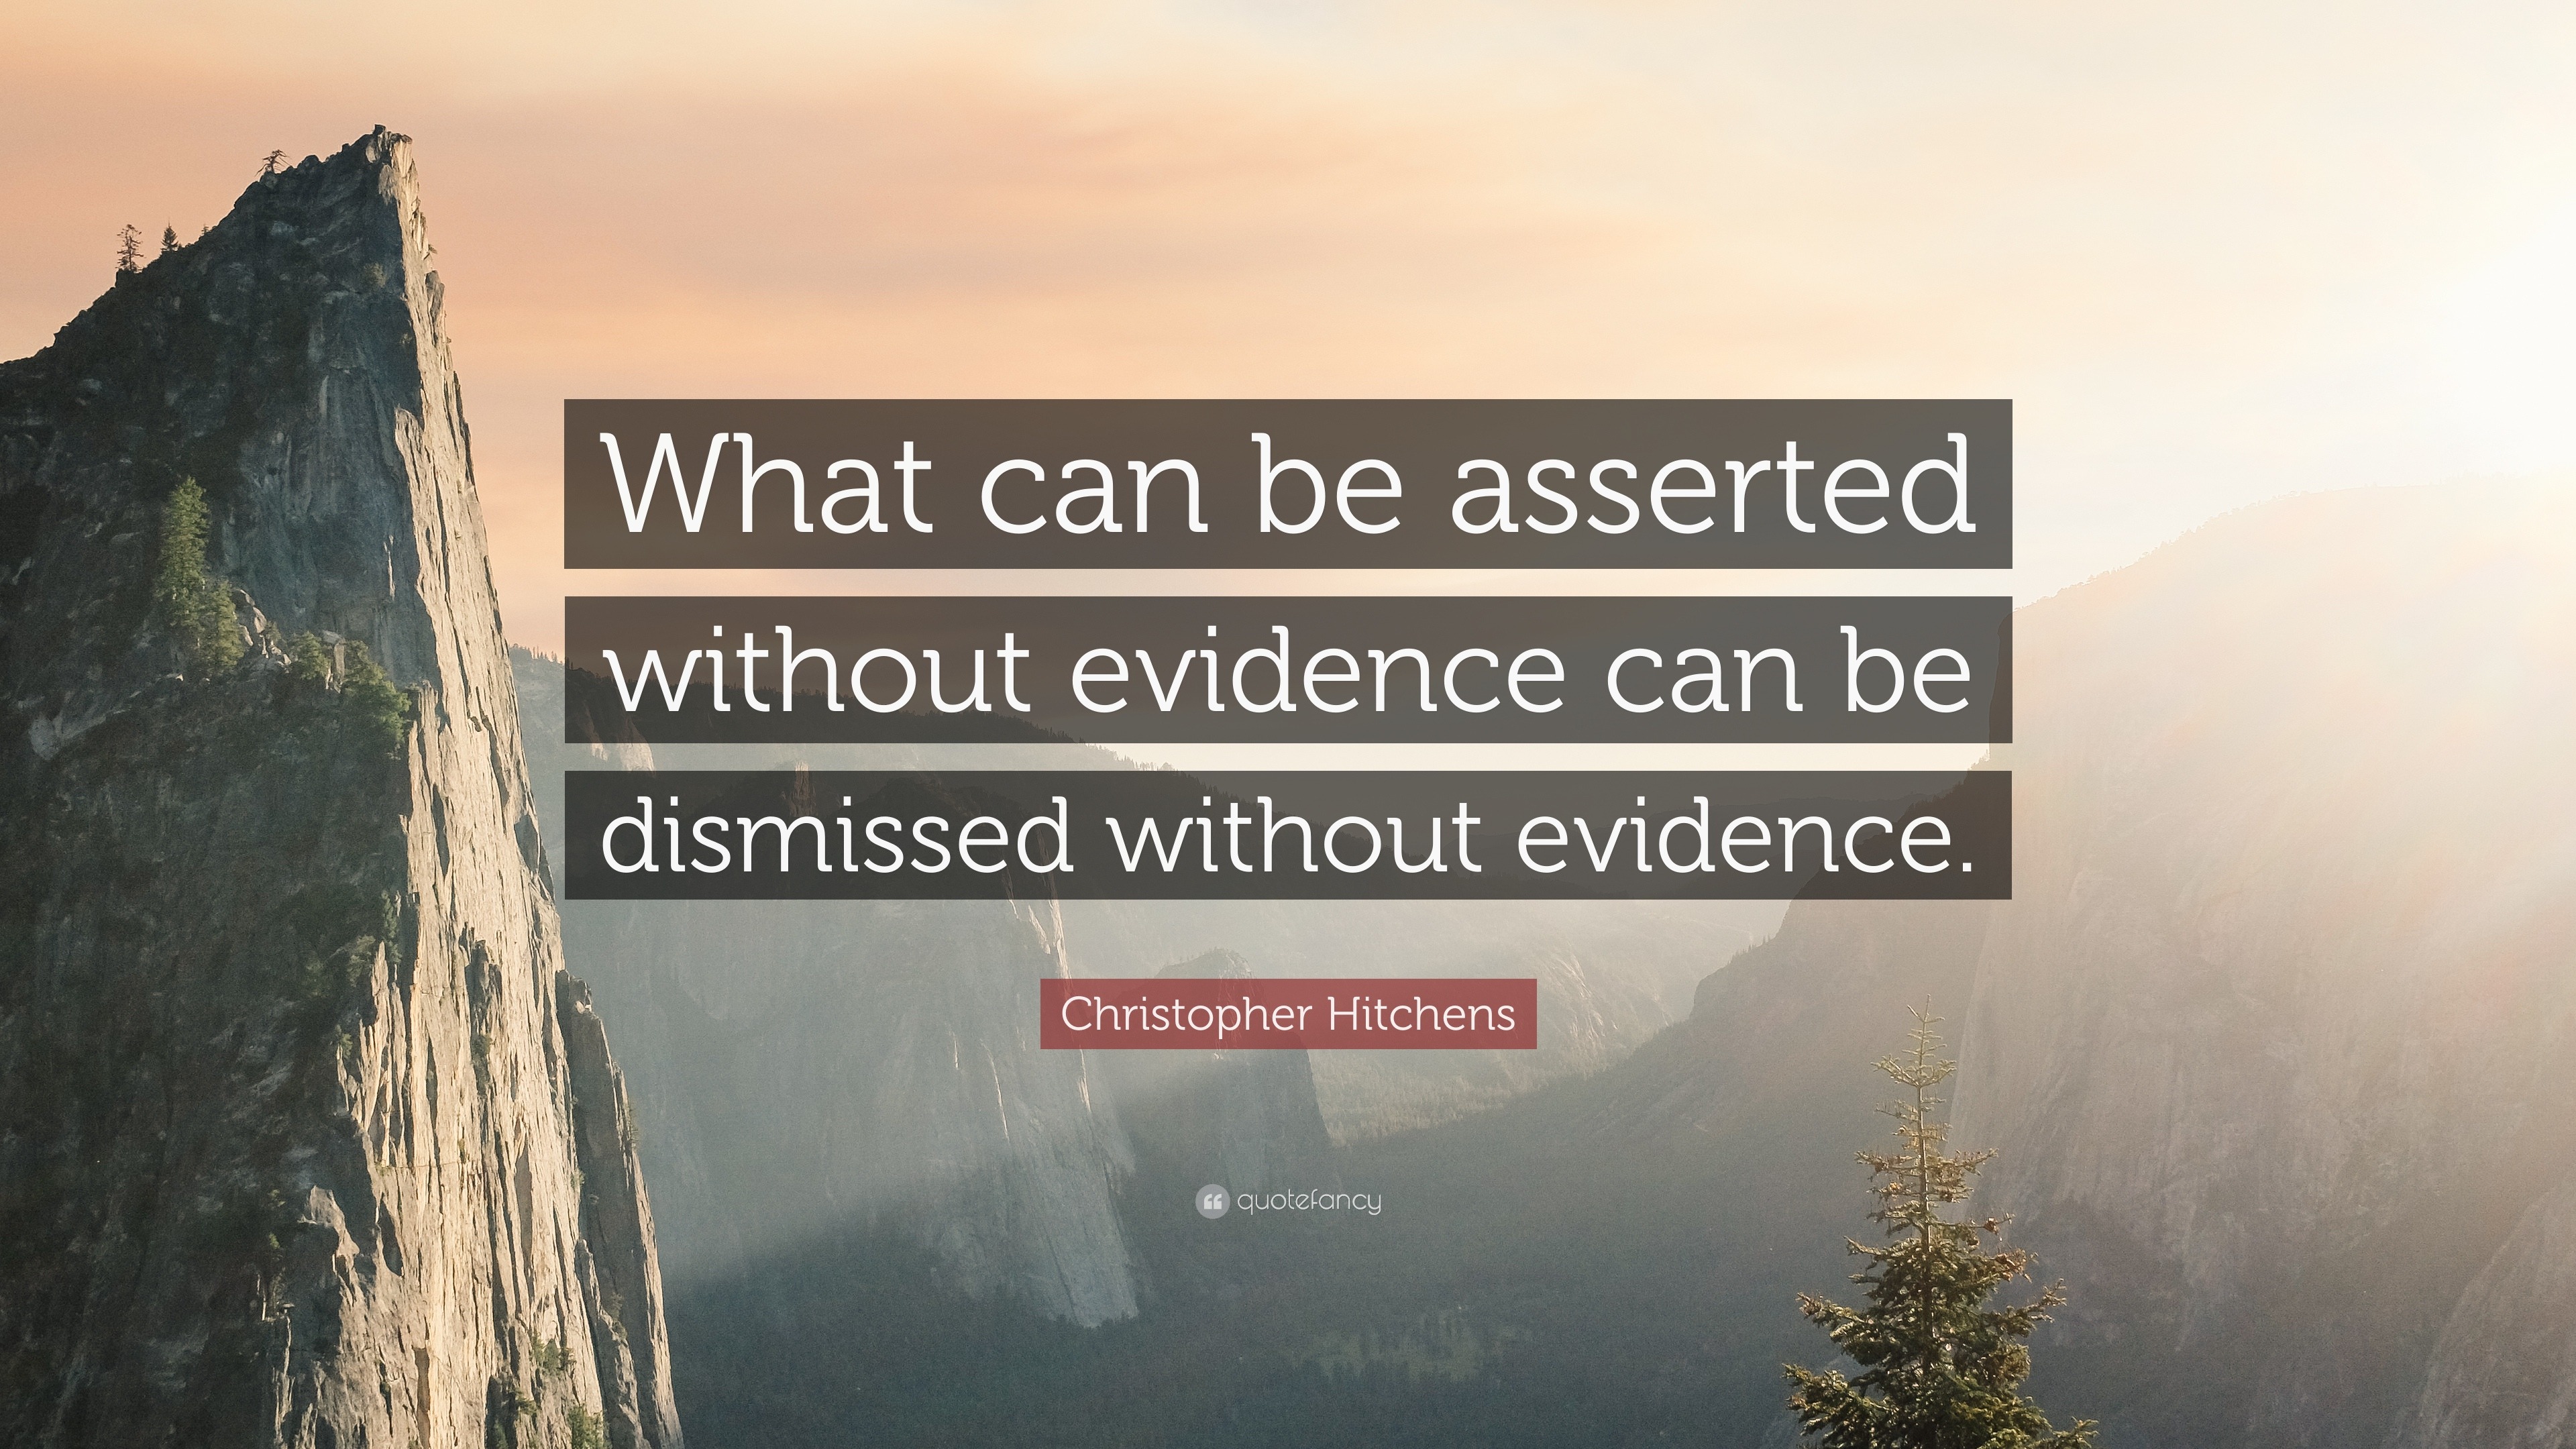 That which is asserted without evidence